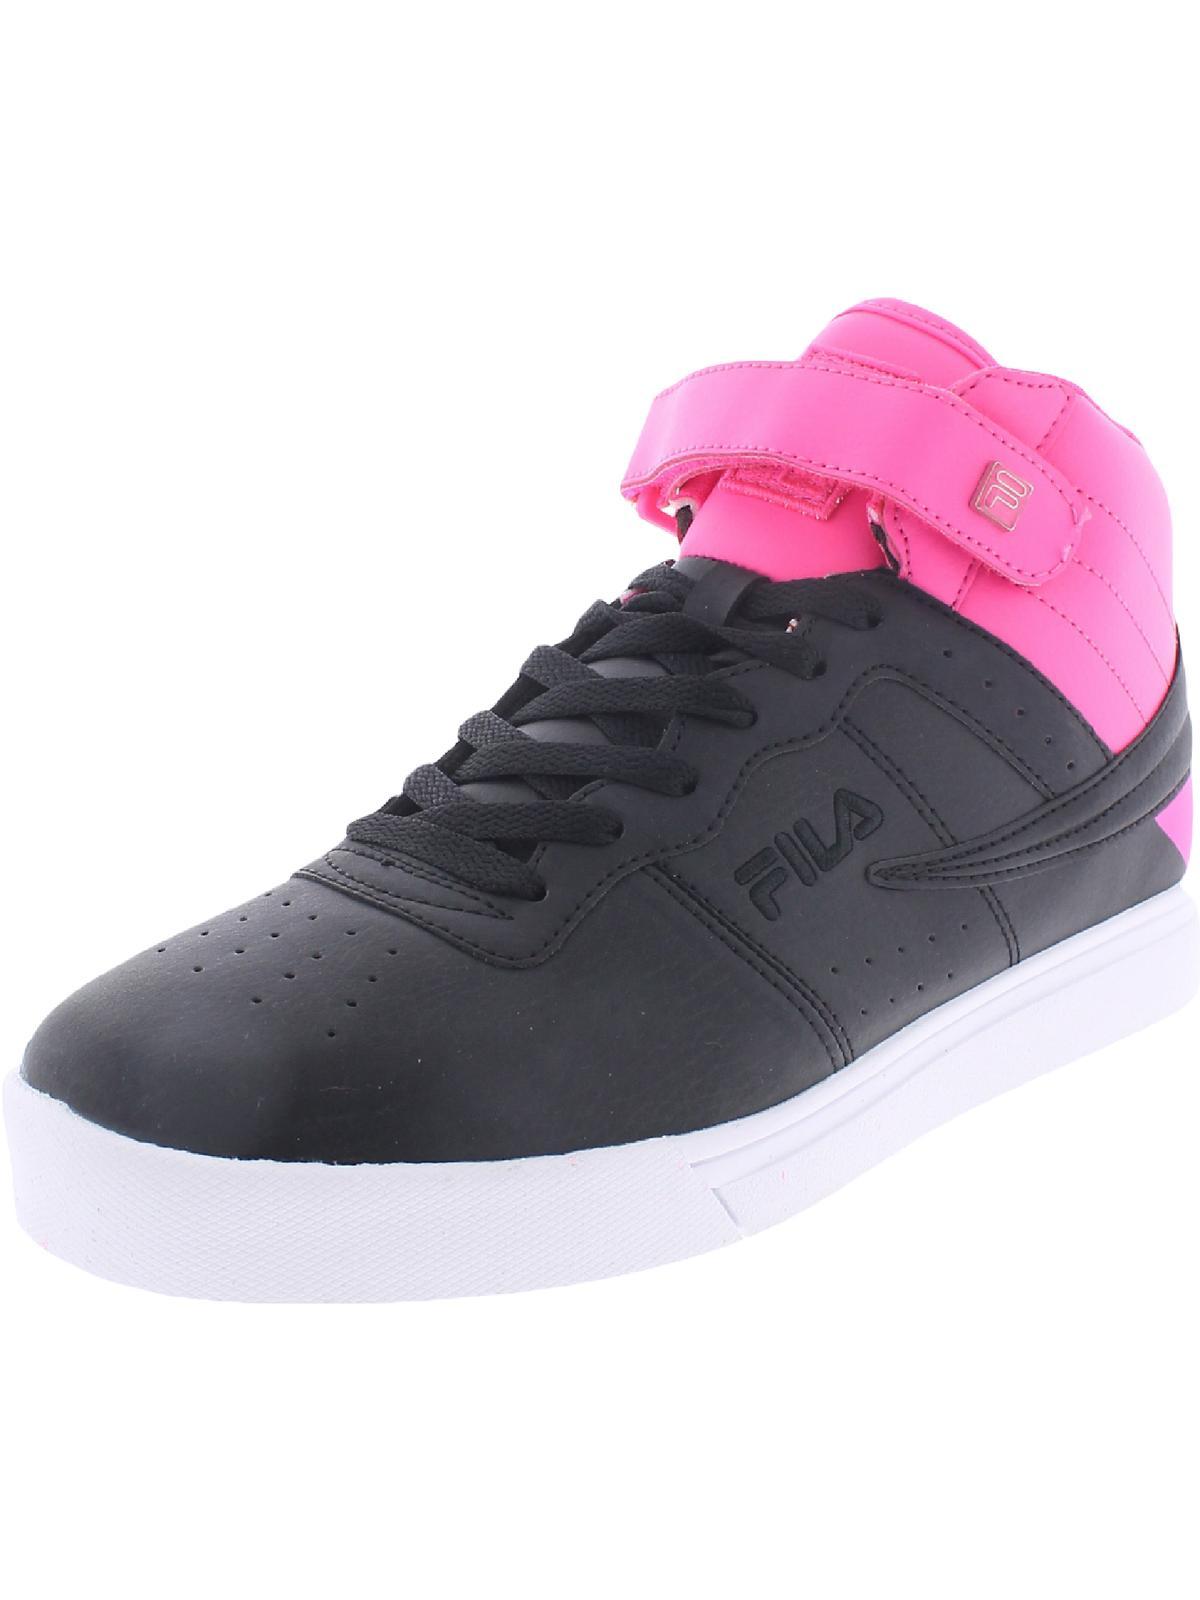 Fila Vulc 13 Harlay Faux Leather Mid Top Basketball Shoes in Pink | Lyst